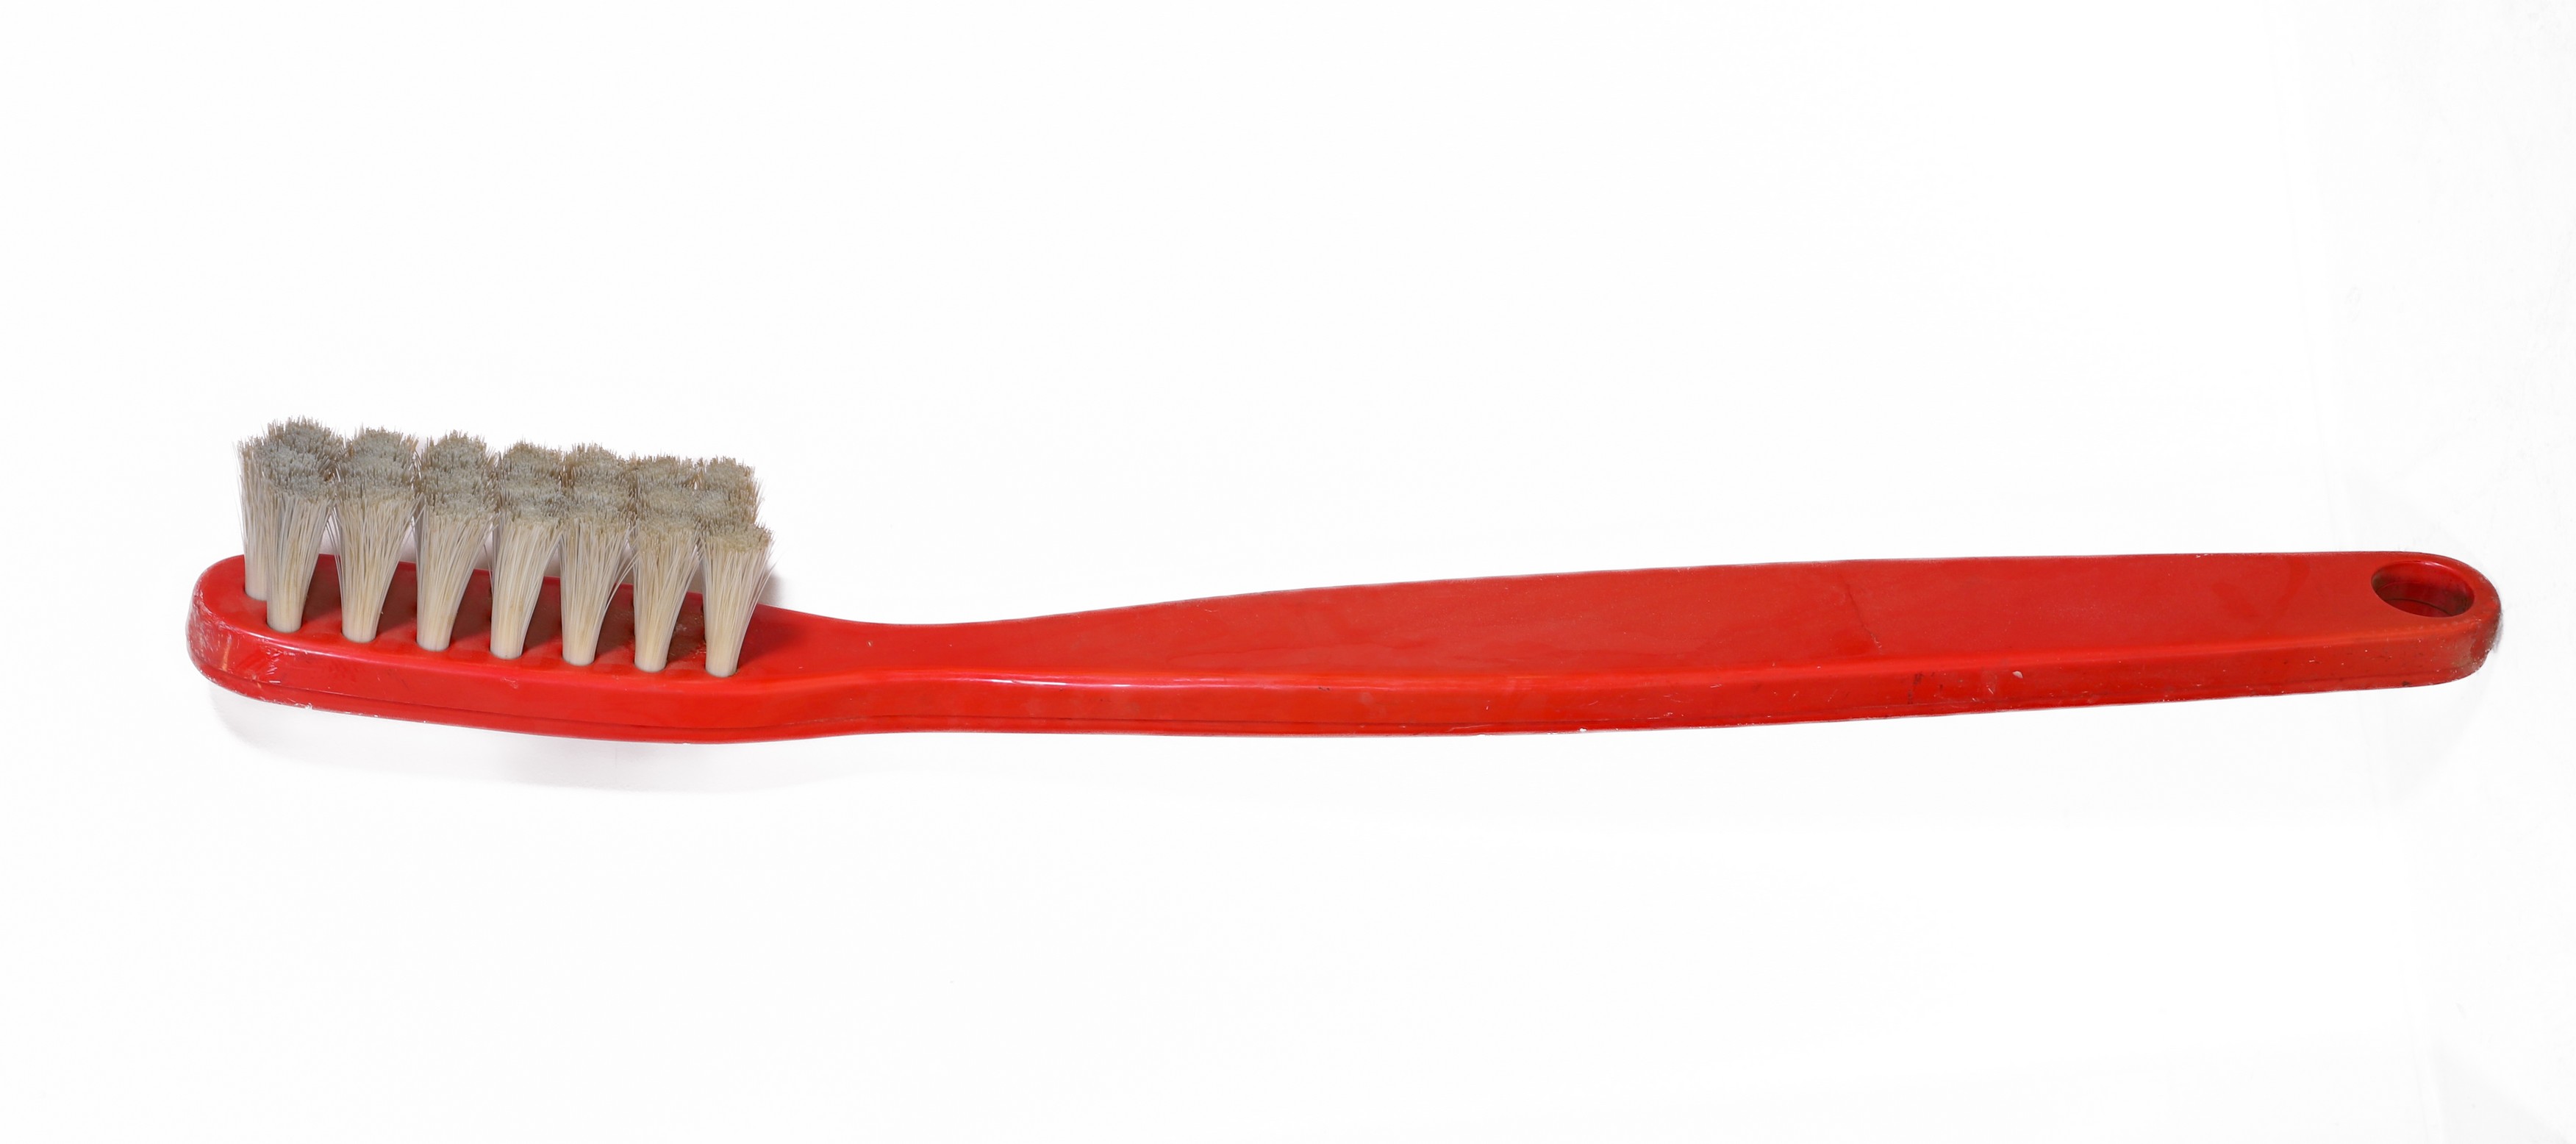 Think Big NY oversized toothbrush, red